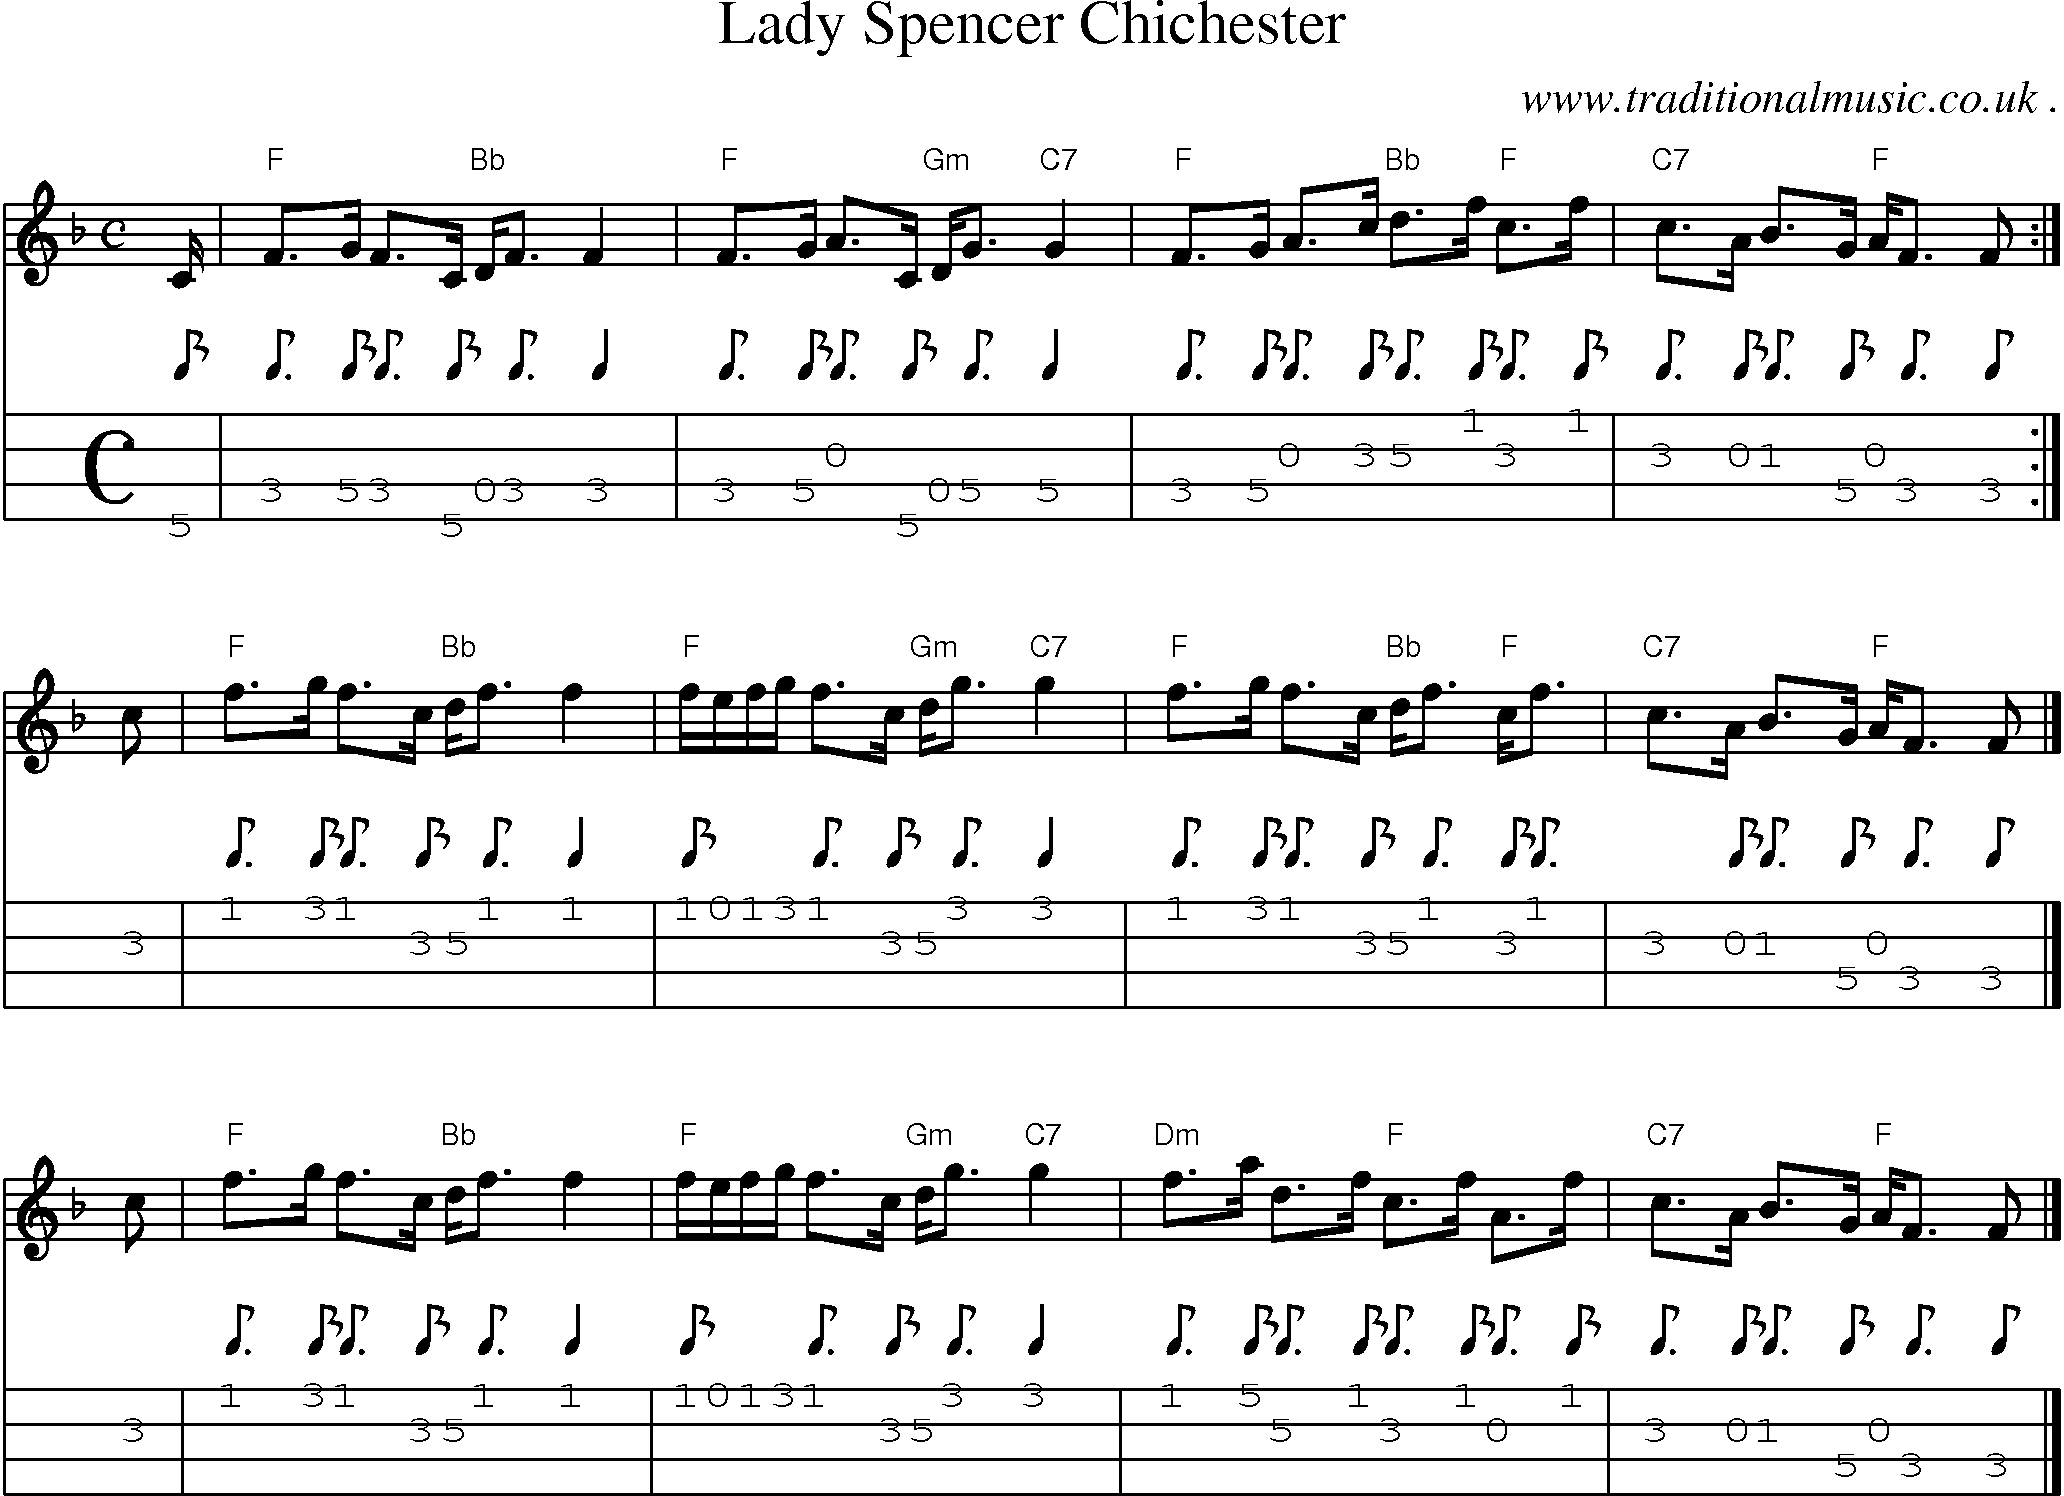 Sheet-music  score, Chords and Mandolin Tabs for Lady Spencer Chichester